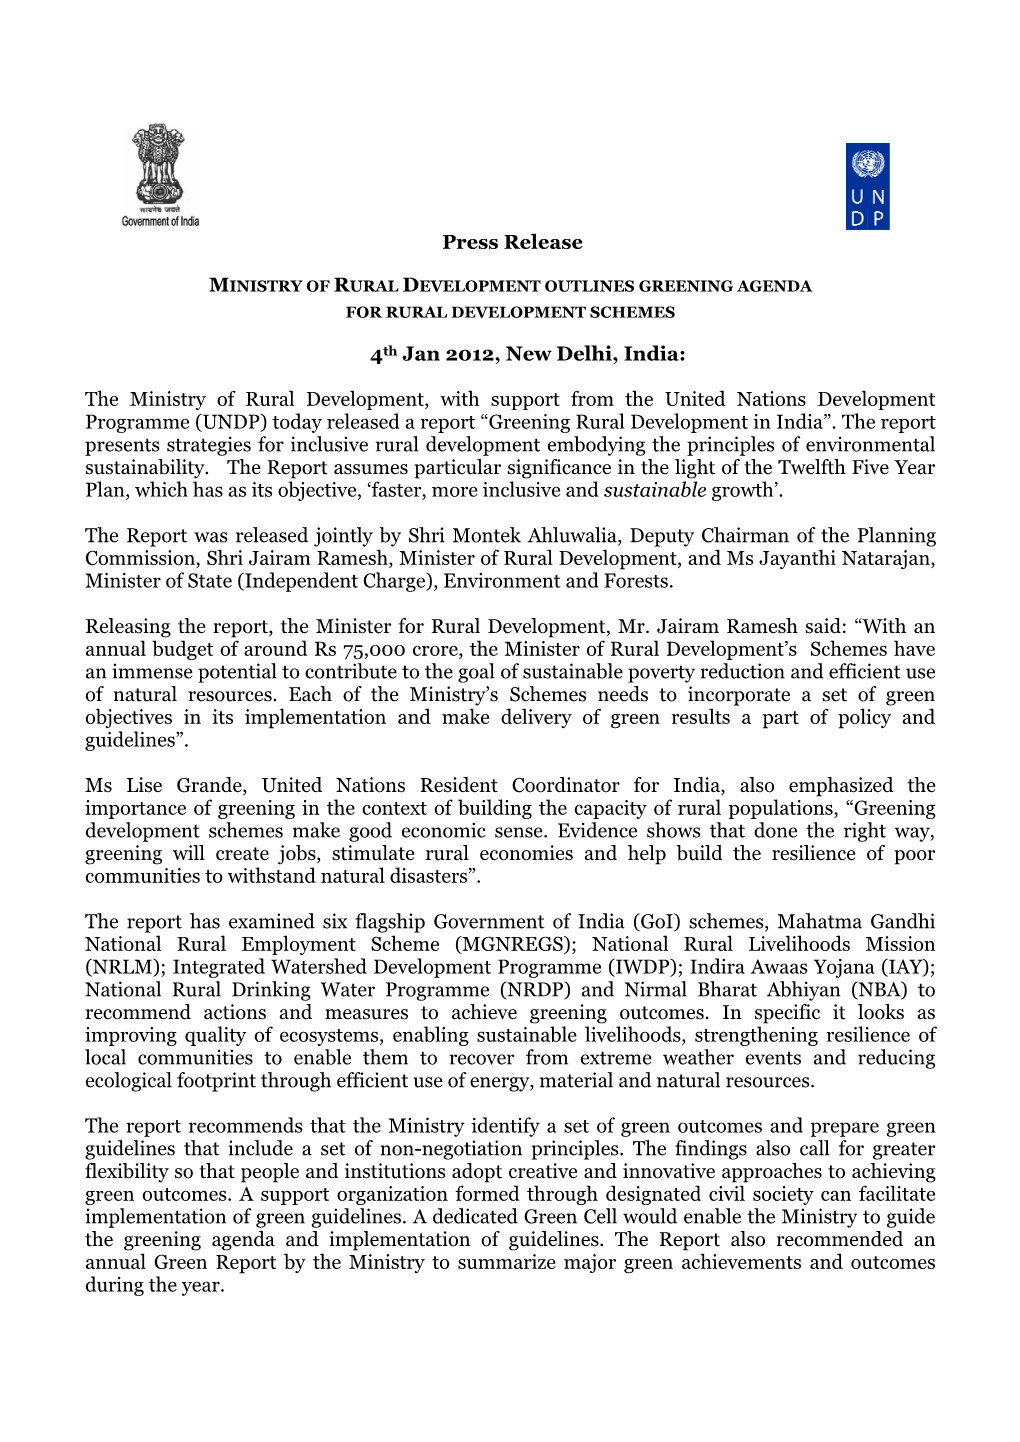 Press Release 4Th Jan 2012, New Delhi, India: the Ministry of Rural